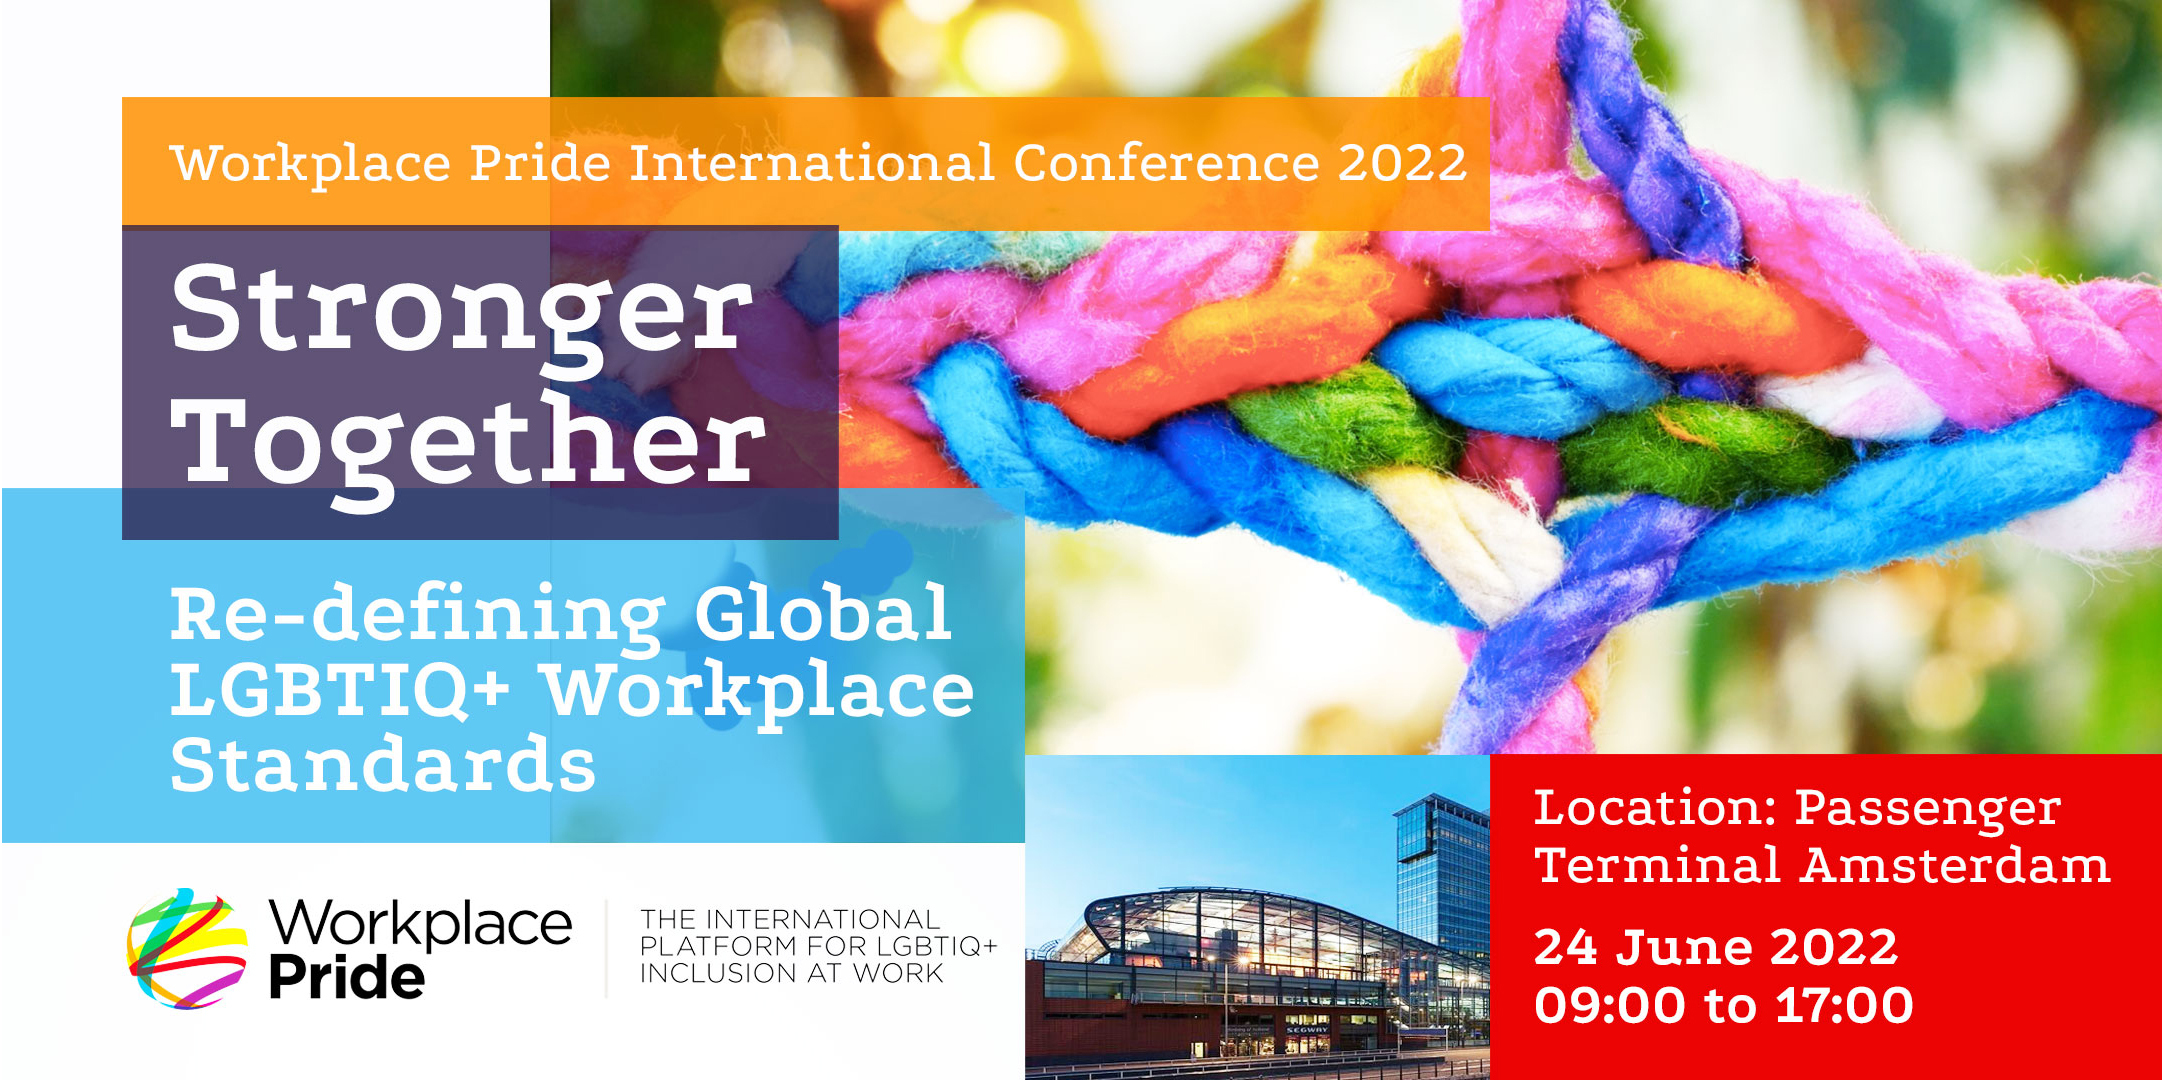 Workplace Pride 2022 International Conference.